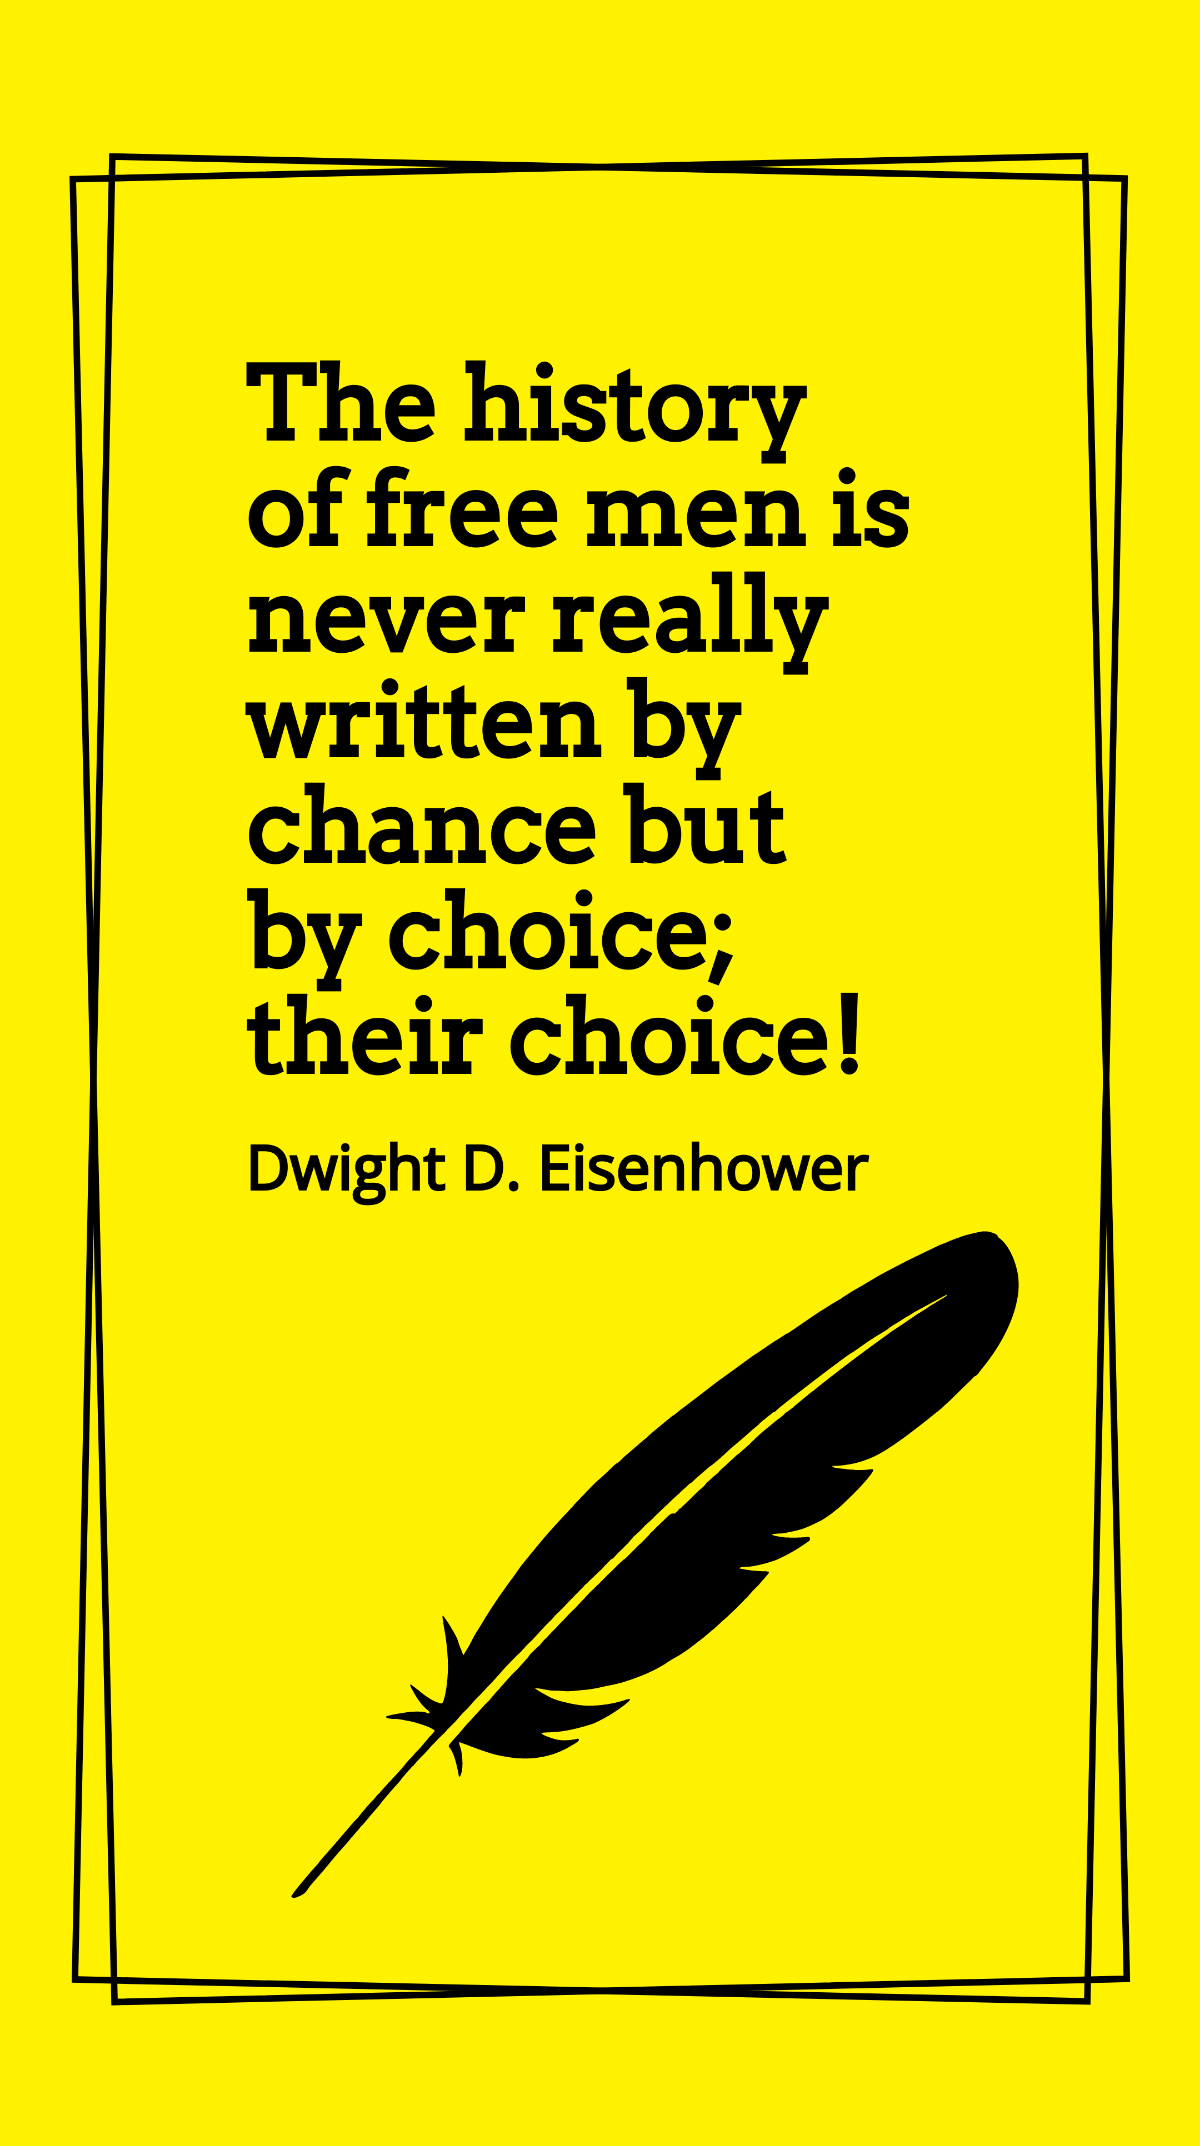 Dwight D. Eisenhower - The history of men is never really written by chance but by choice; their choice! Template